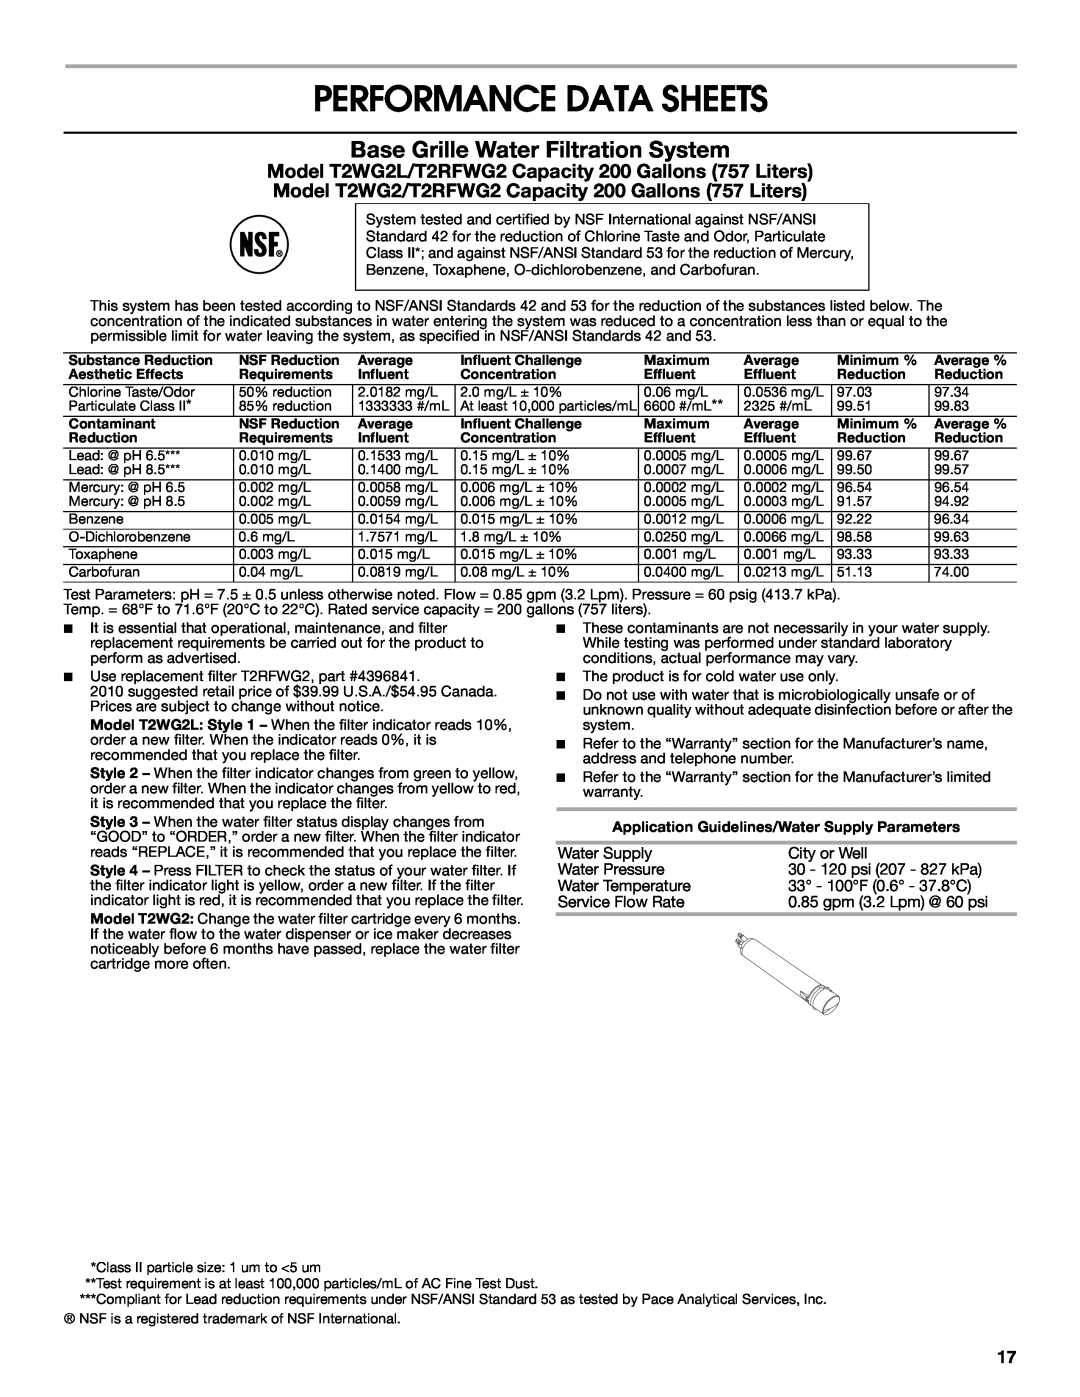 Jenn-Air W10303988A manual Performance Data Sheets, Base Grille Water Filtration System 